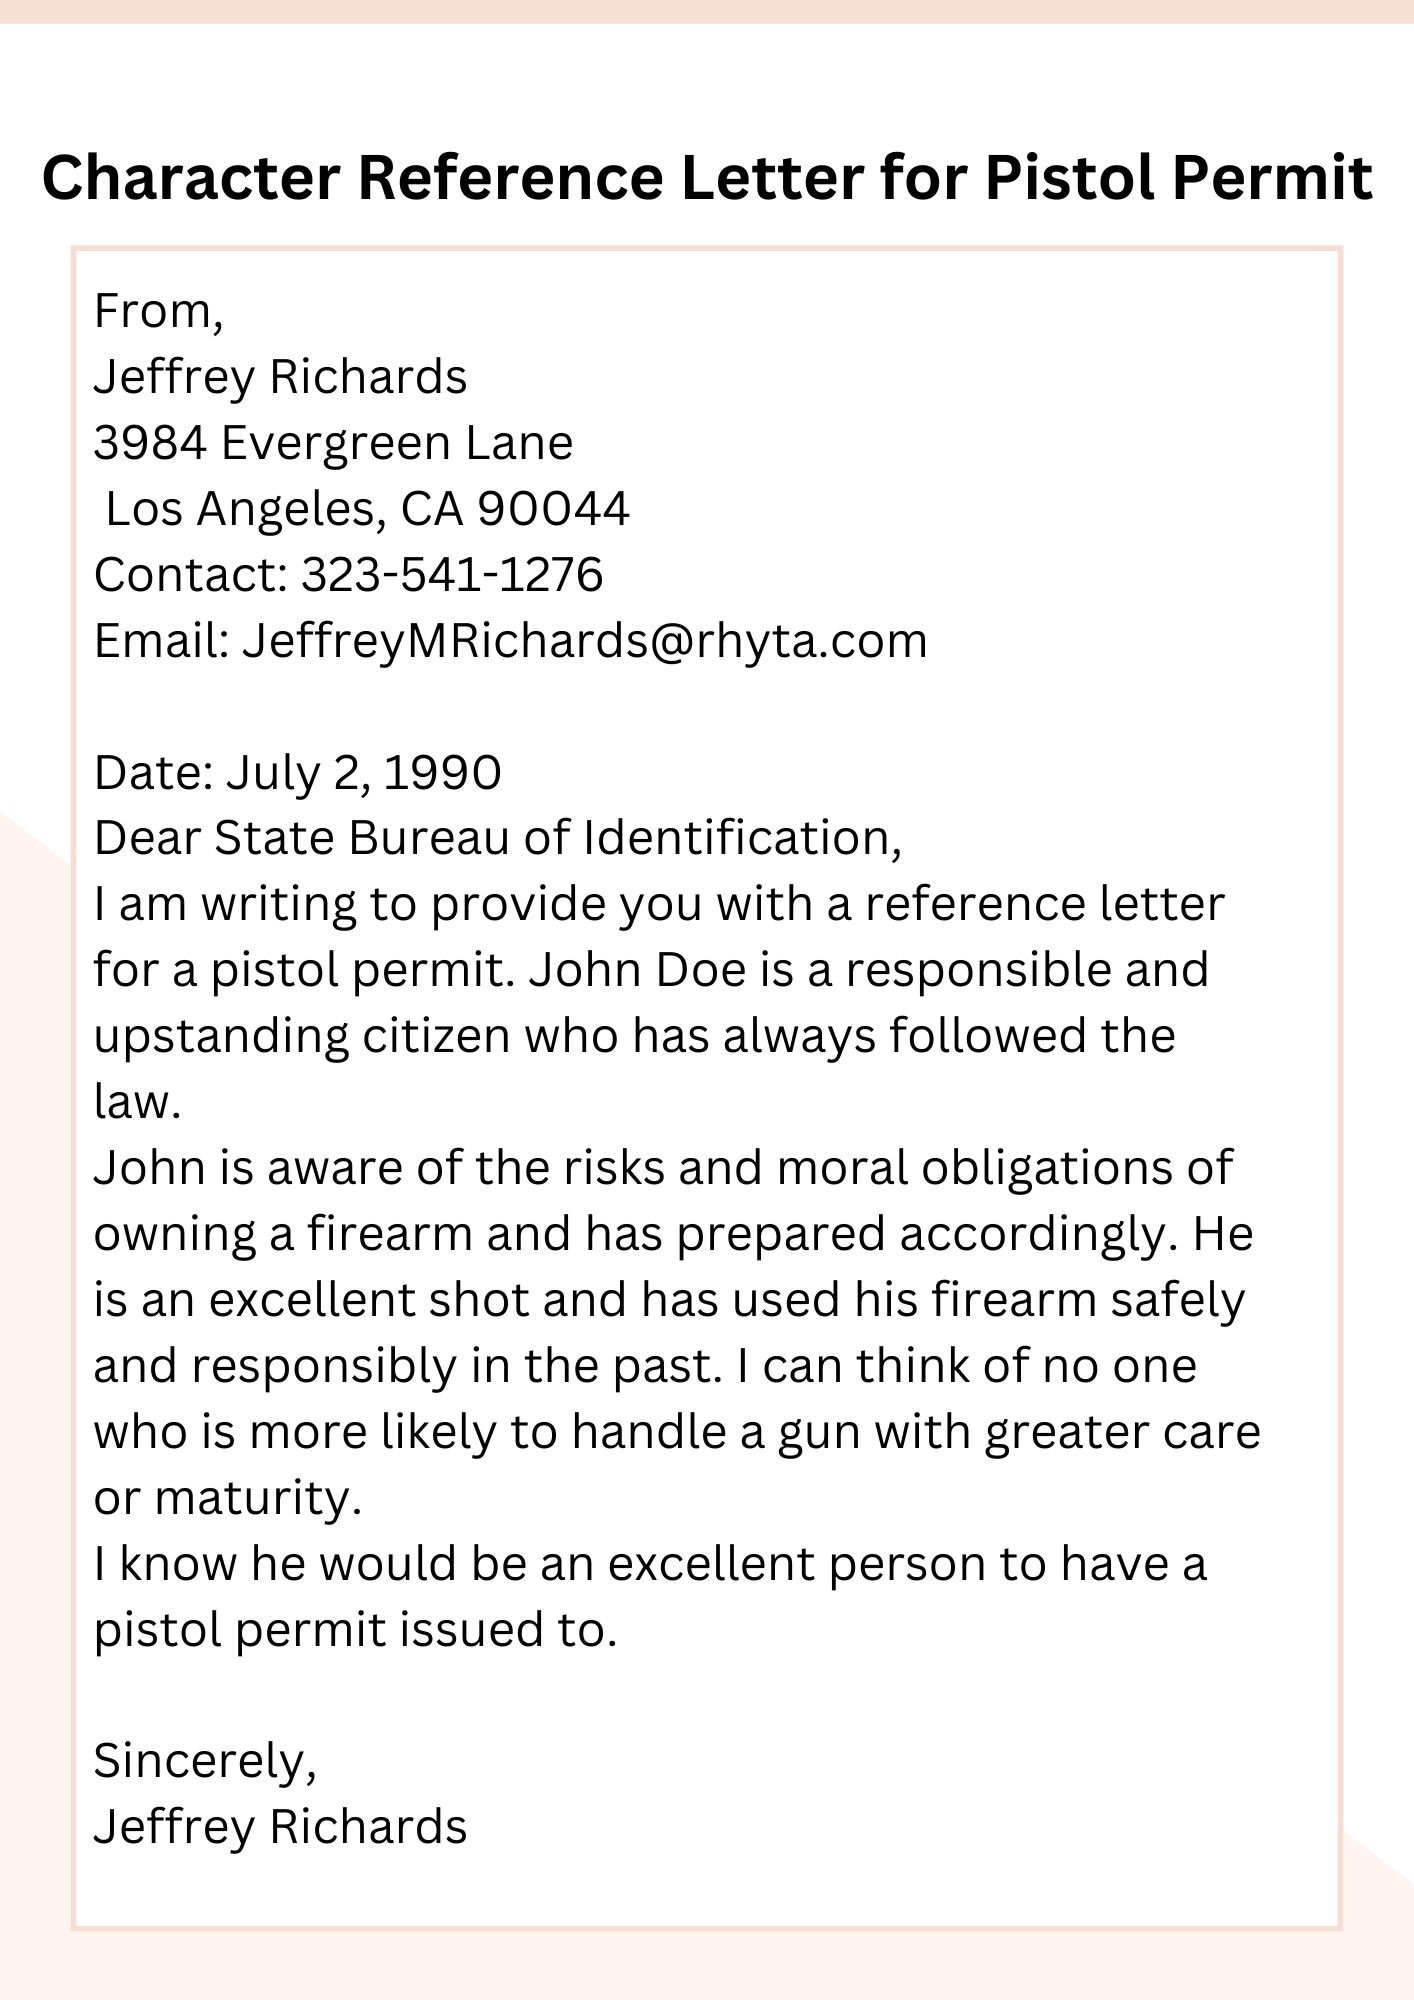 Character Reference Letter for Pistol Permit